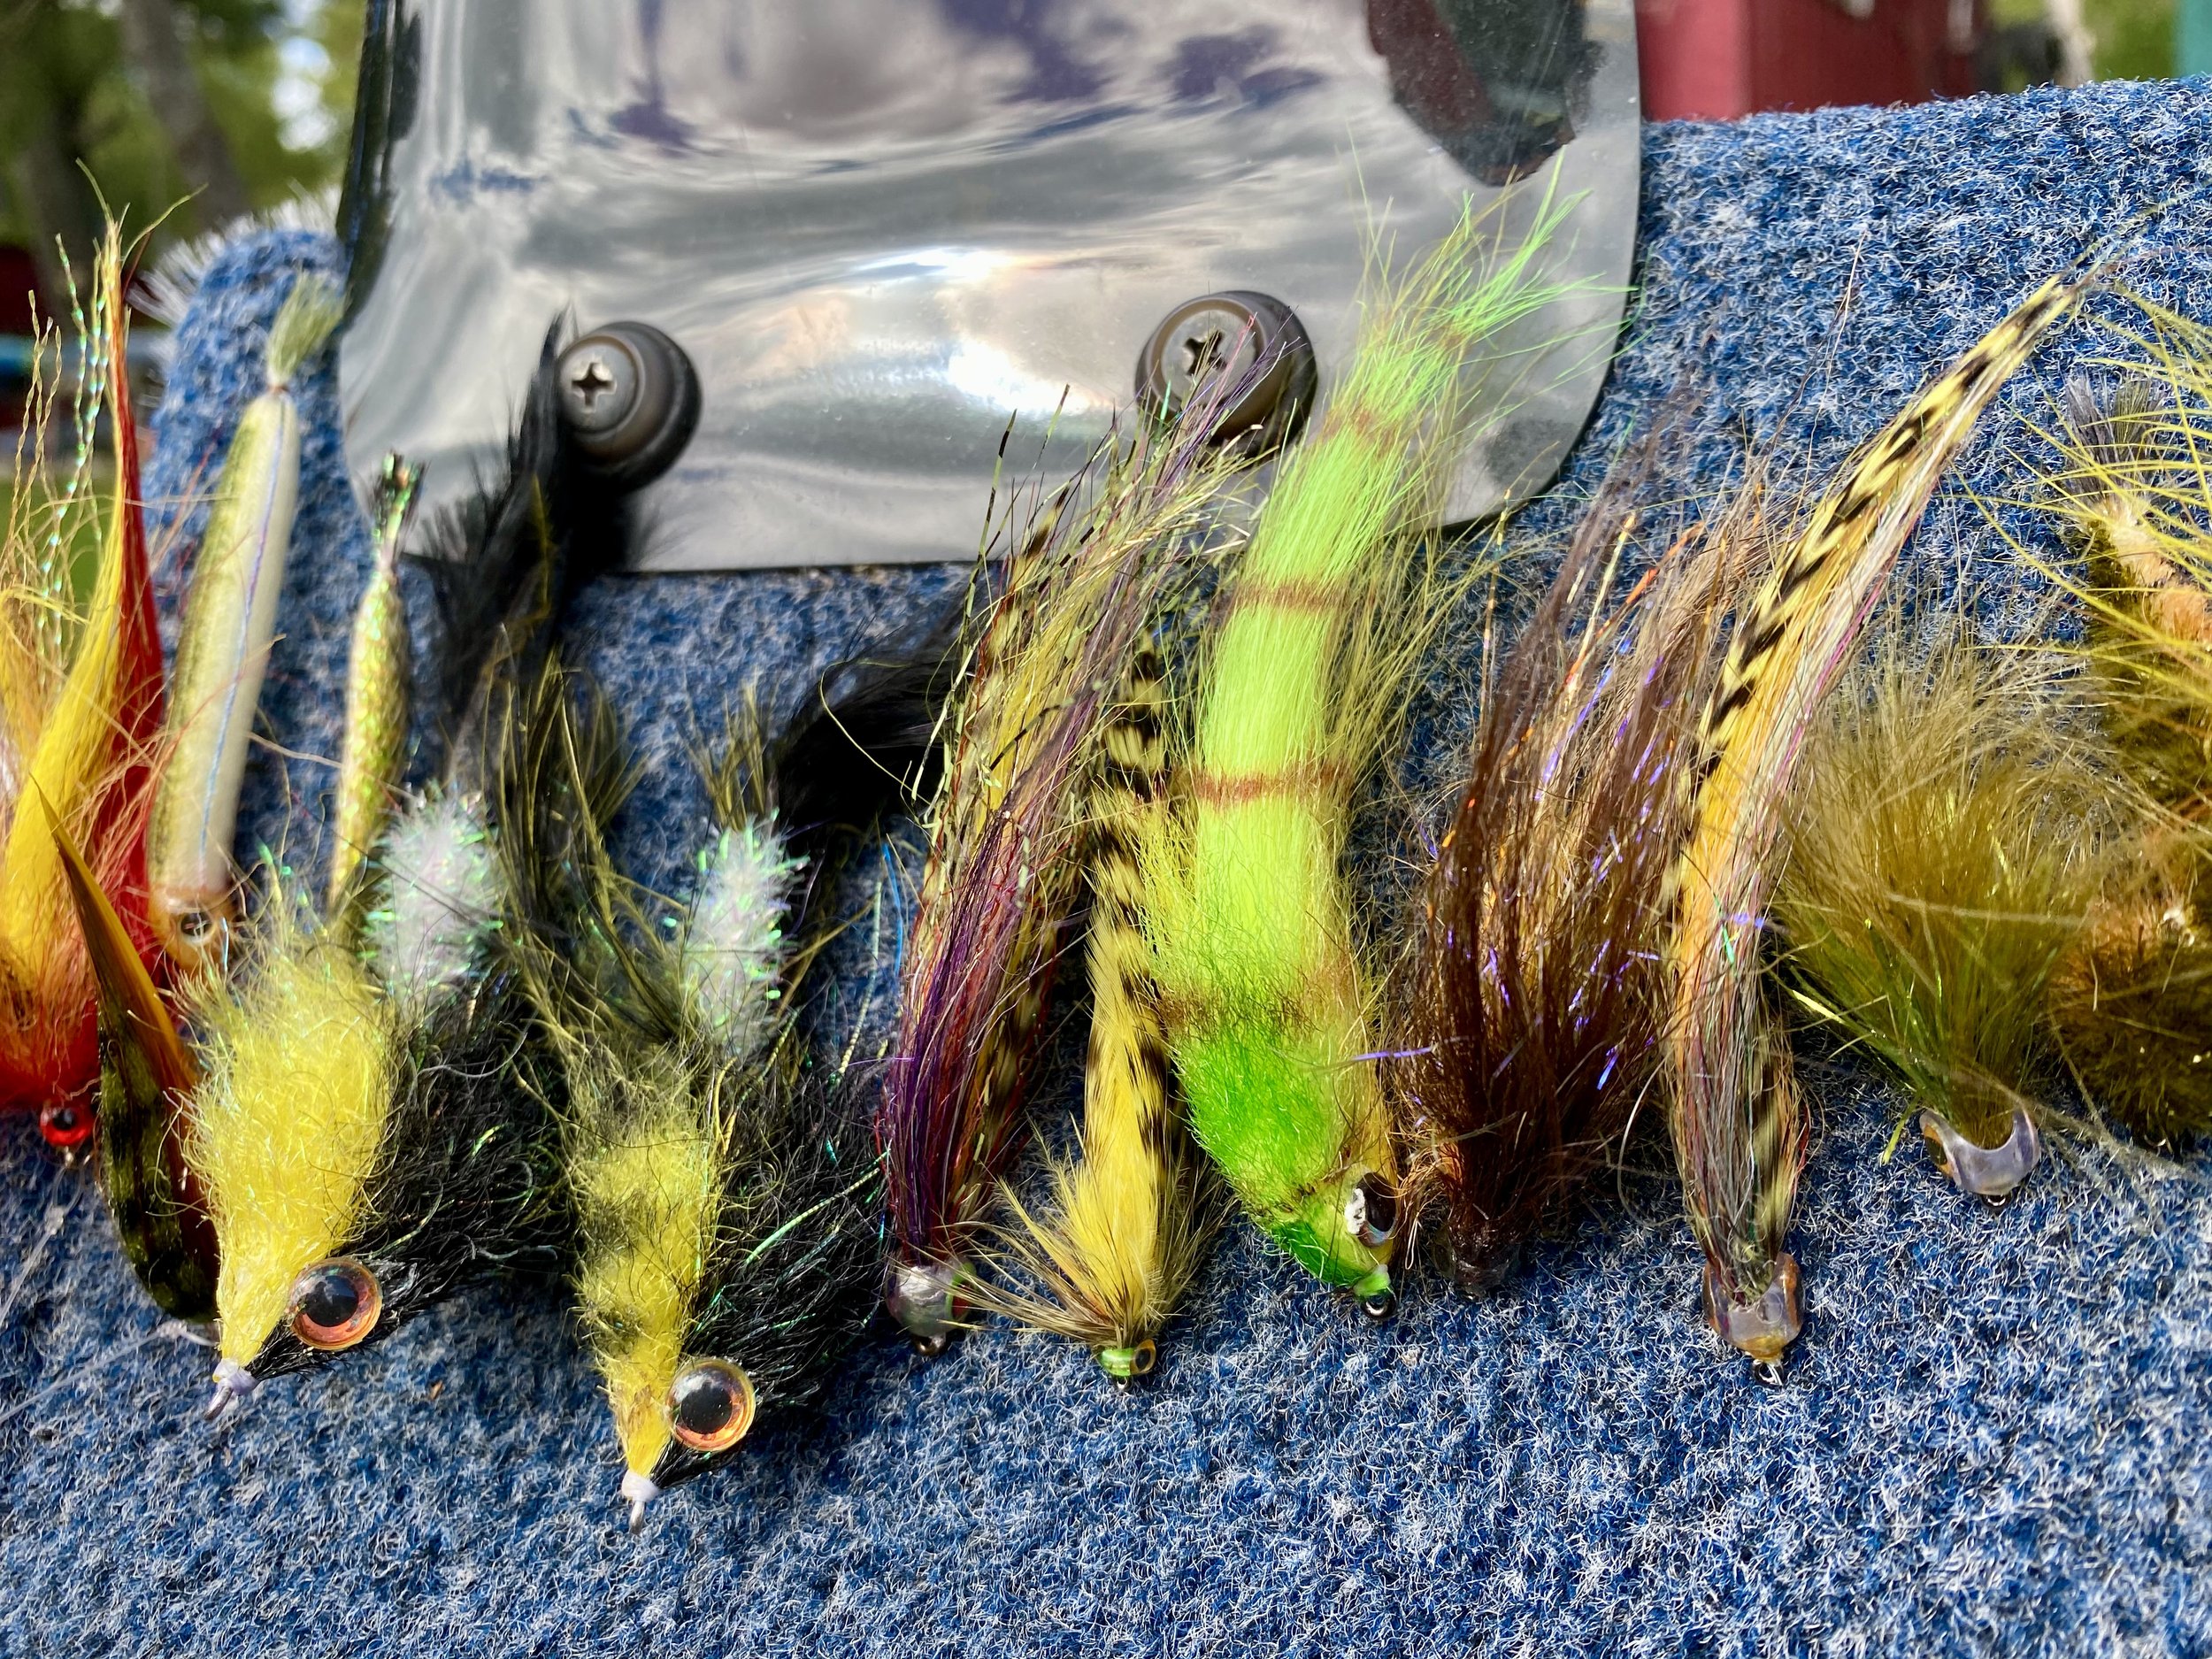 Fly Tying Friday - The Marabou Perch — Panfish On The Fly